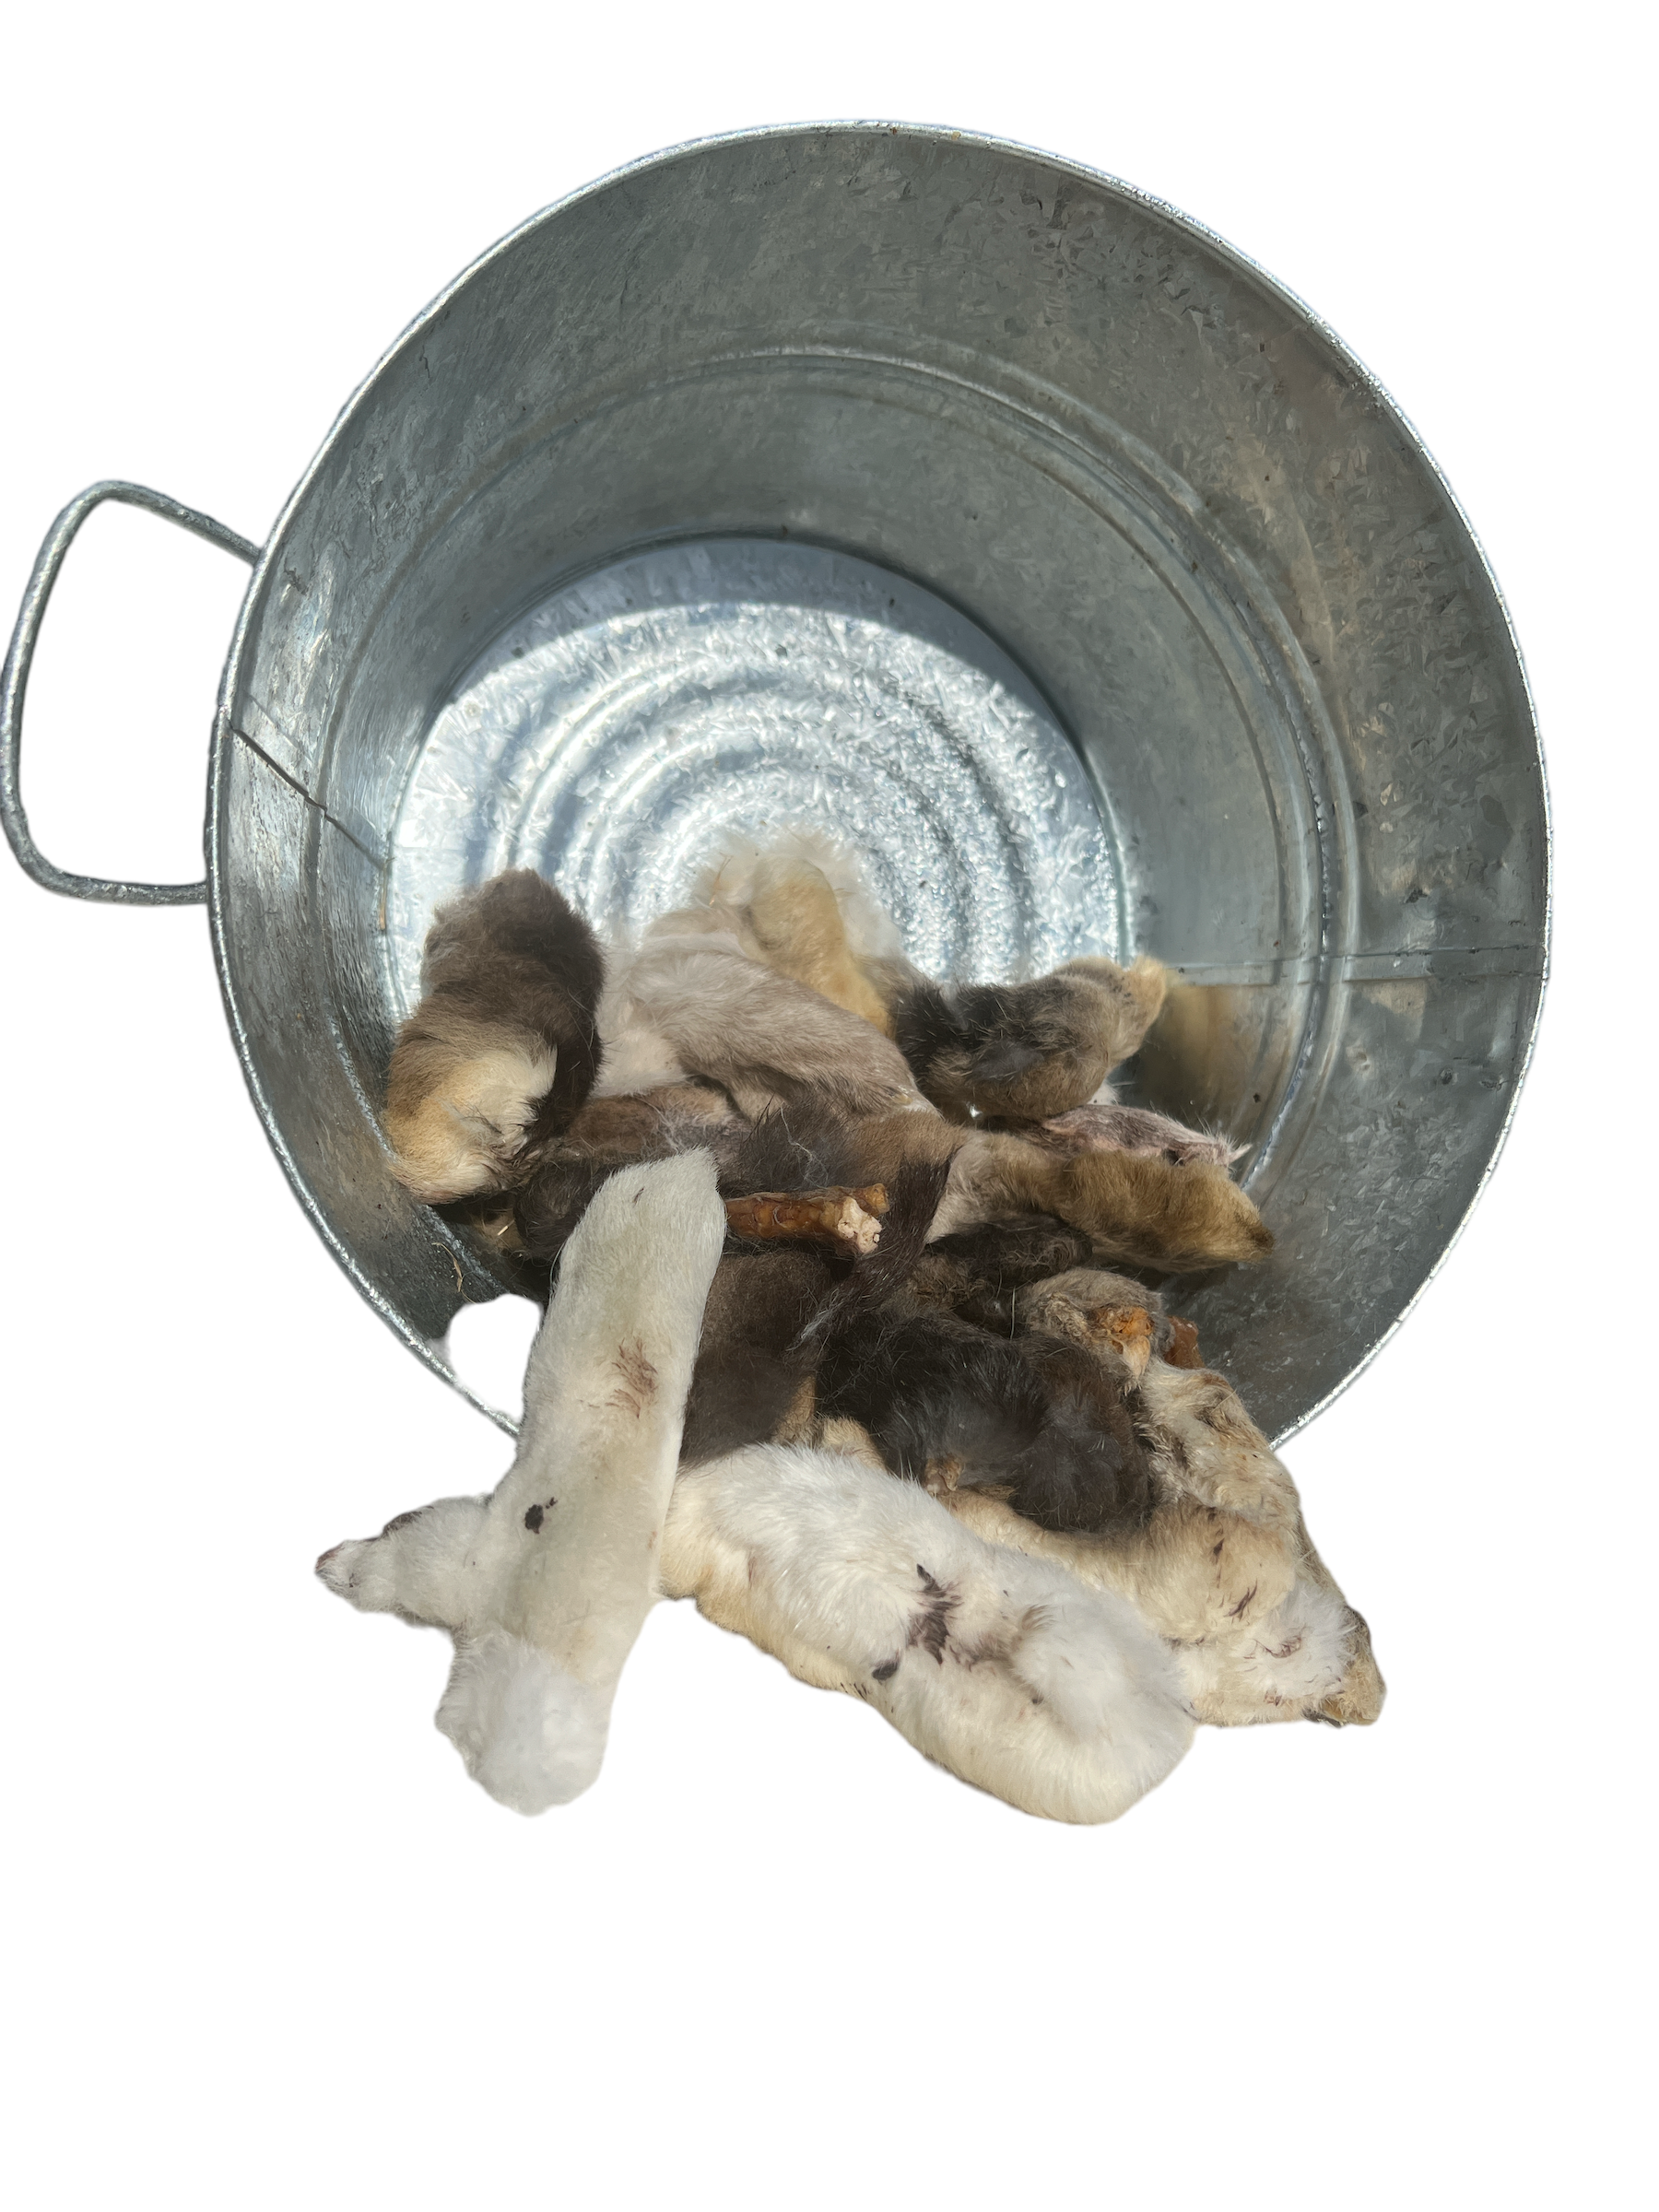 Rabbit Feet with Fur Treats for Dogs